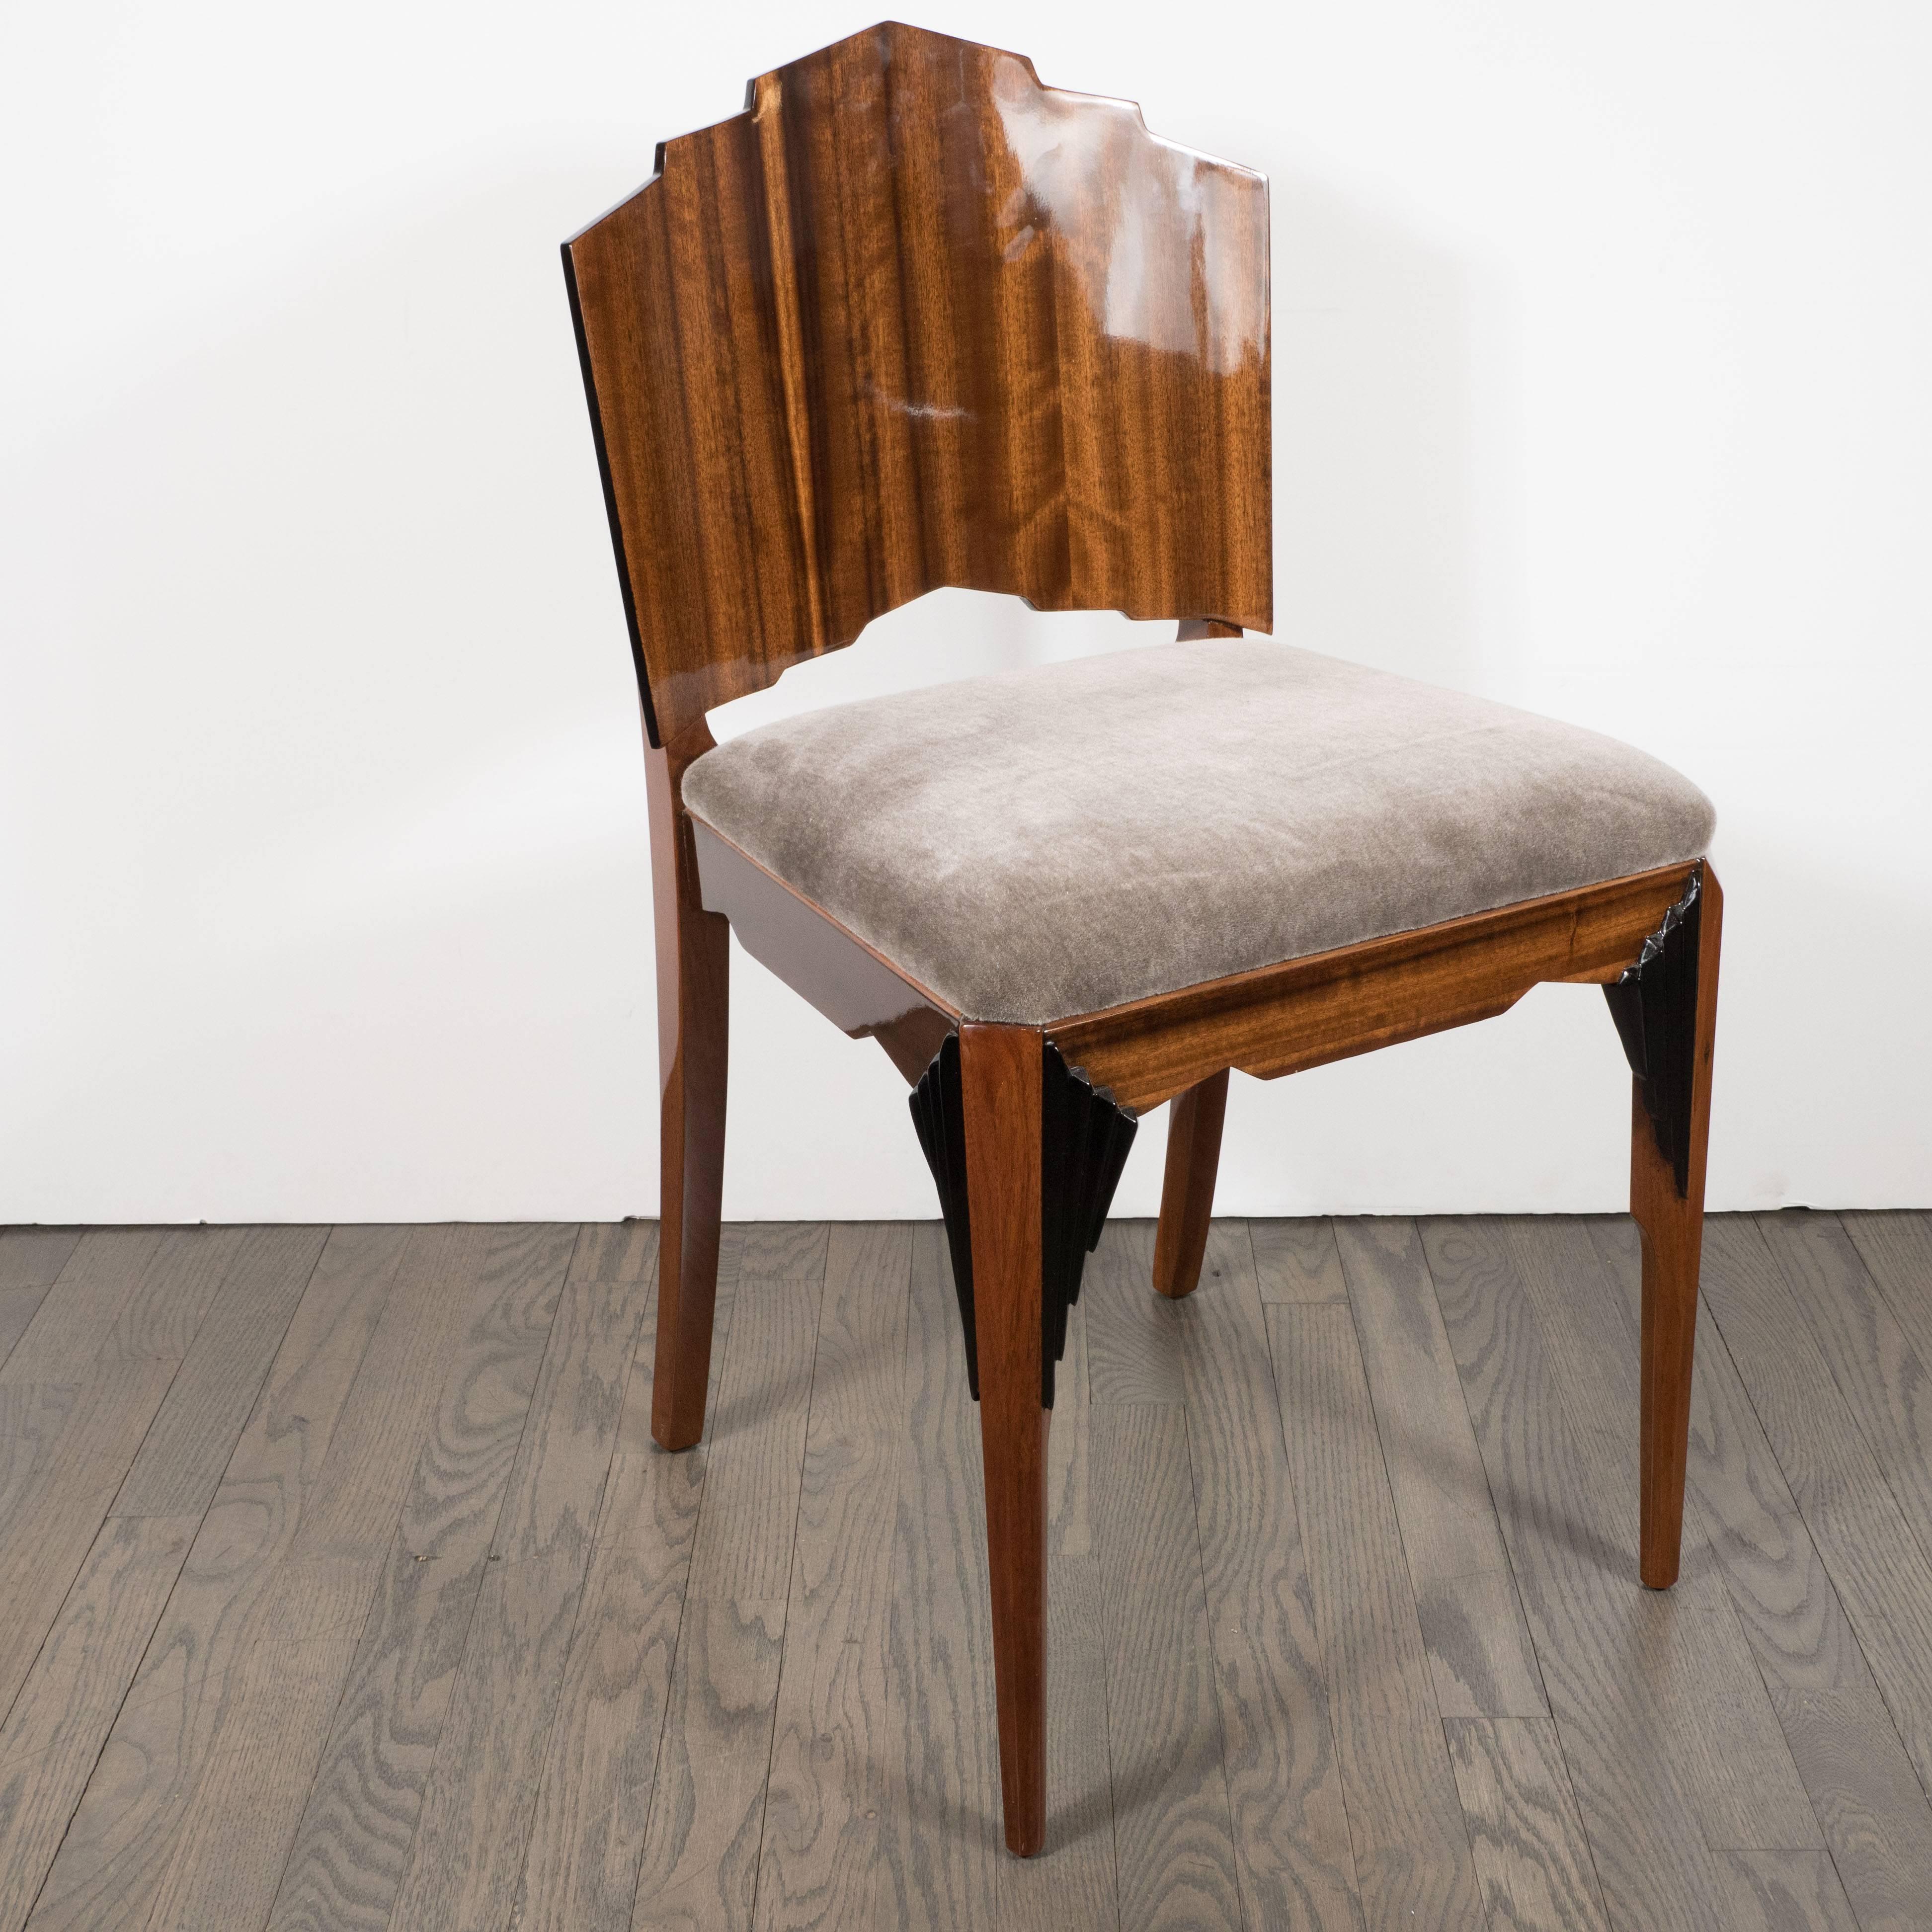 Constructed in the 1930s, this elegant Art Deco chair recalls old world craftsmanship and new world modernity with its skyscraper style tiered back made from beautiful tiger's eye walnut. It features lacquer accents tracing the perimeter of the back